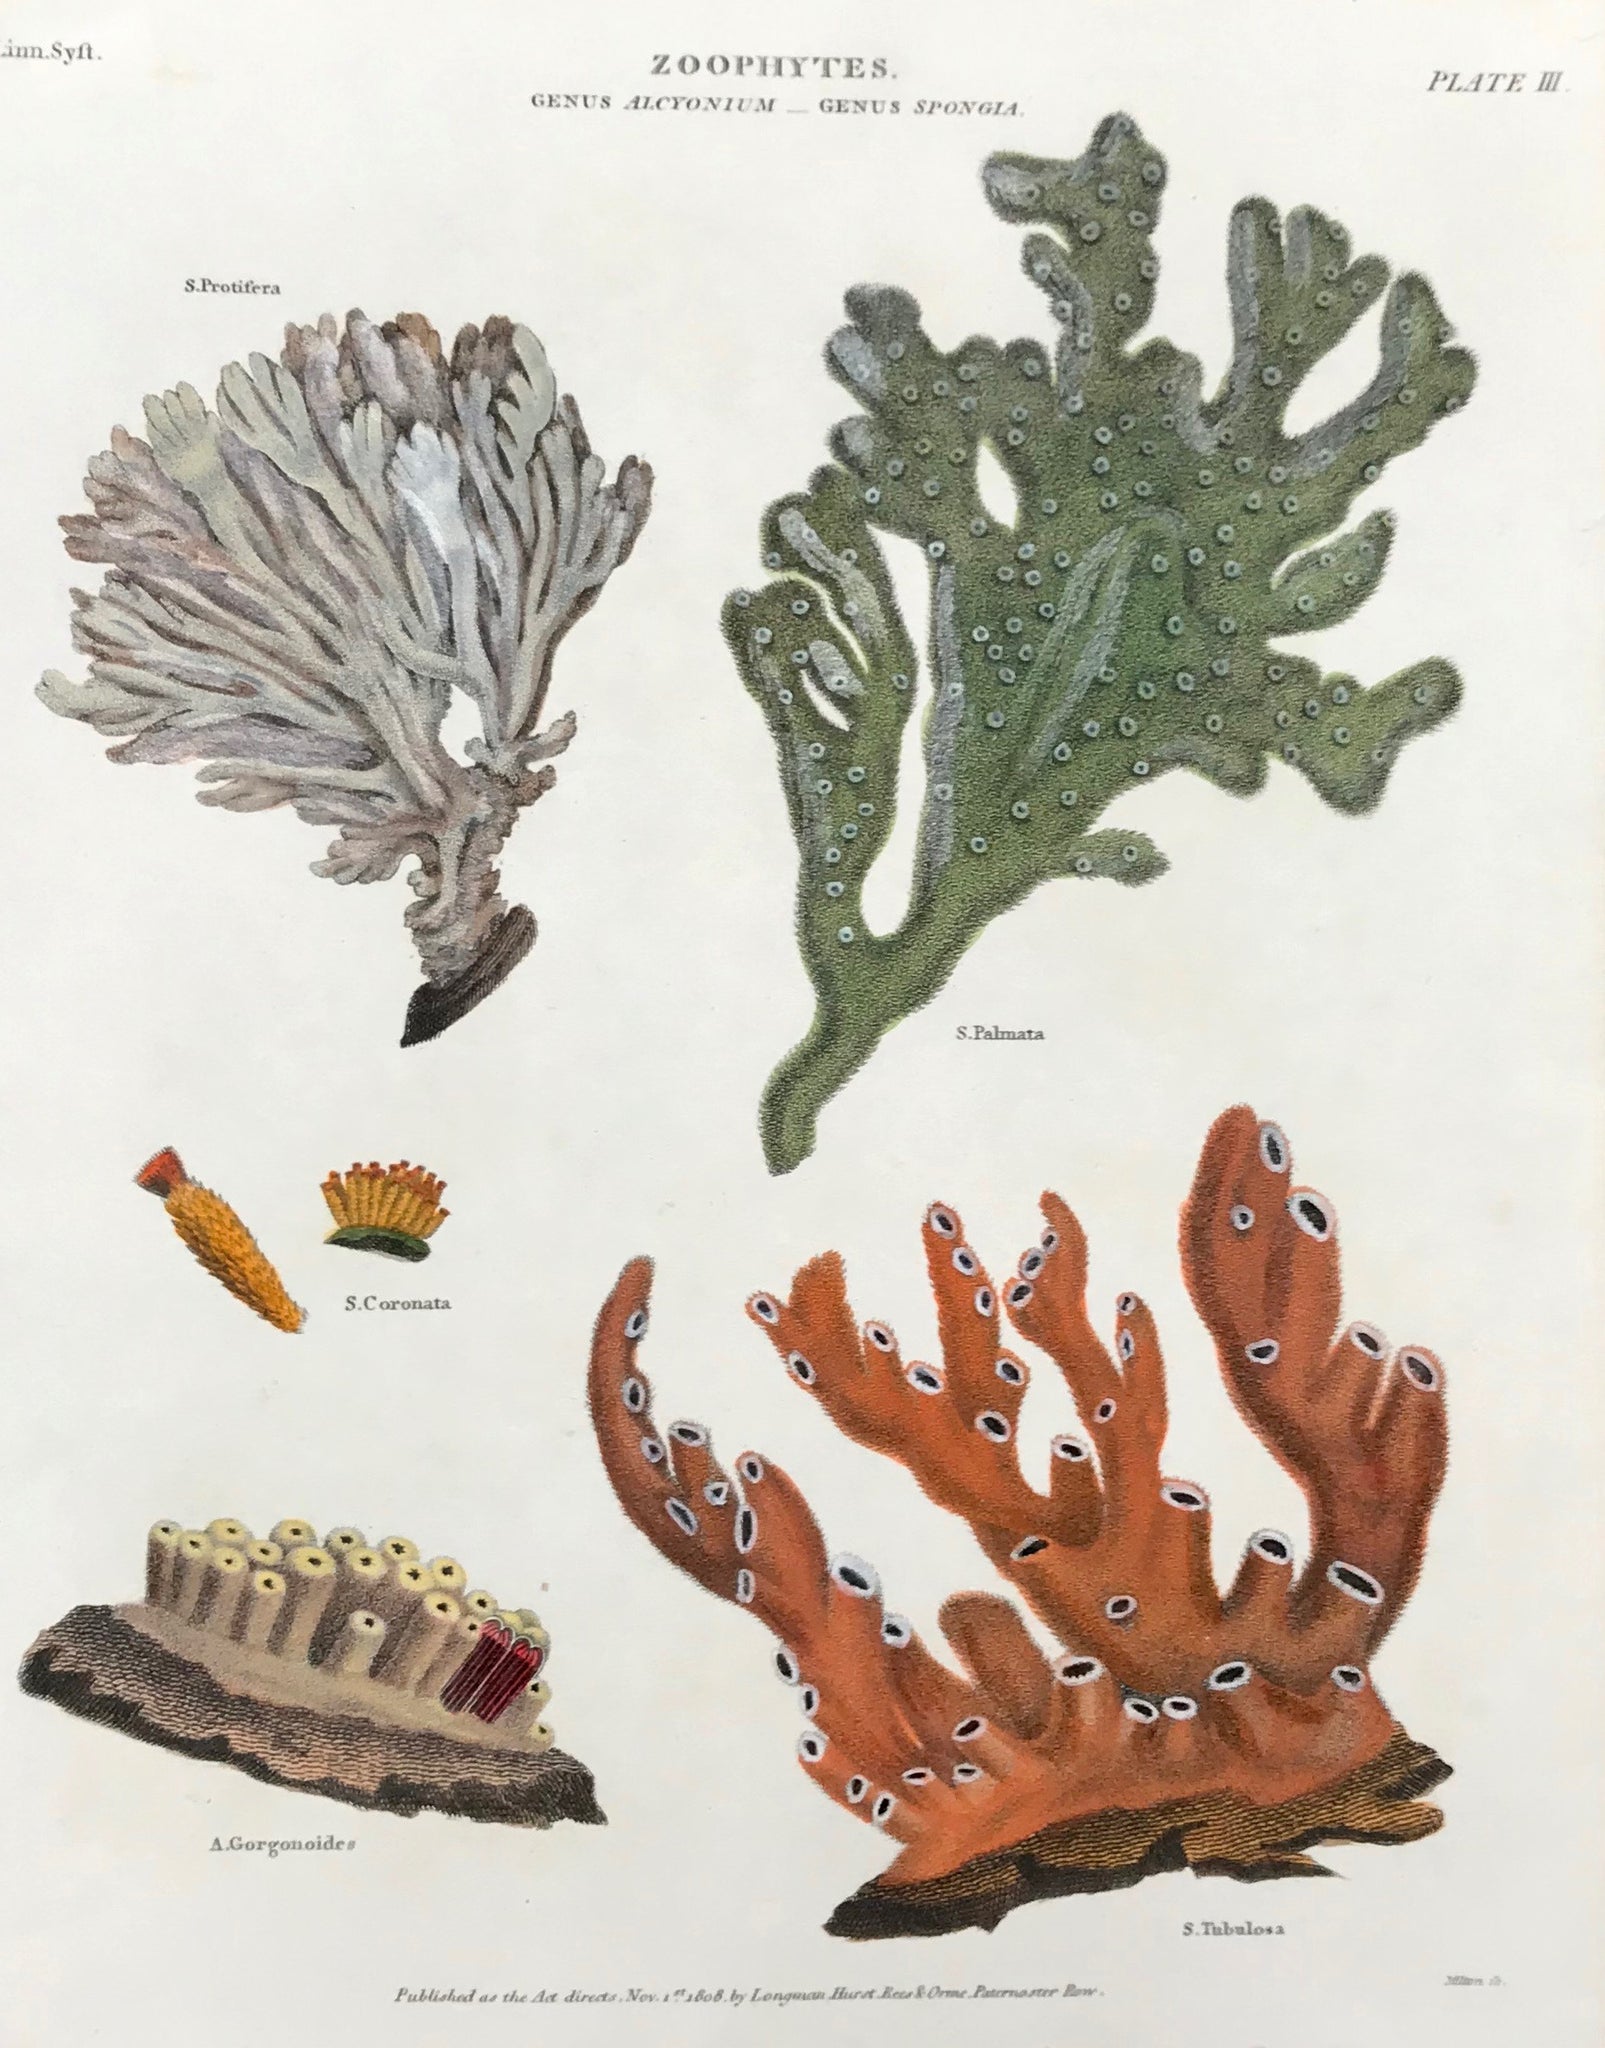 Zoophytes.  Genus Alcyonium - Genus Spongia  Copper engraving by Milton, dated Nov. 1, 1808. Modern hand coloring.